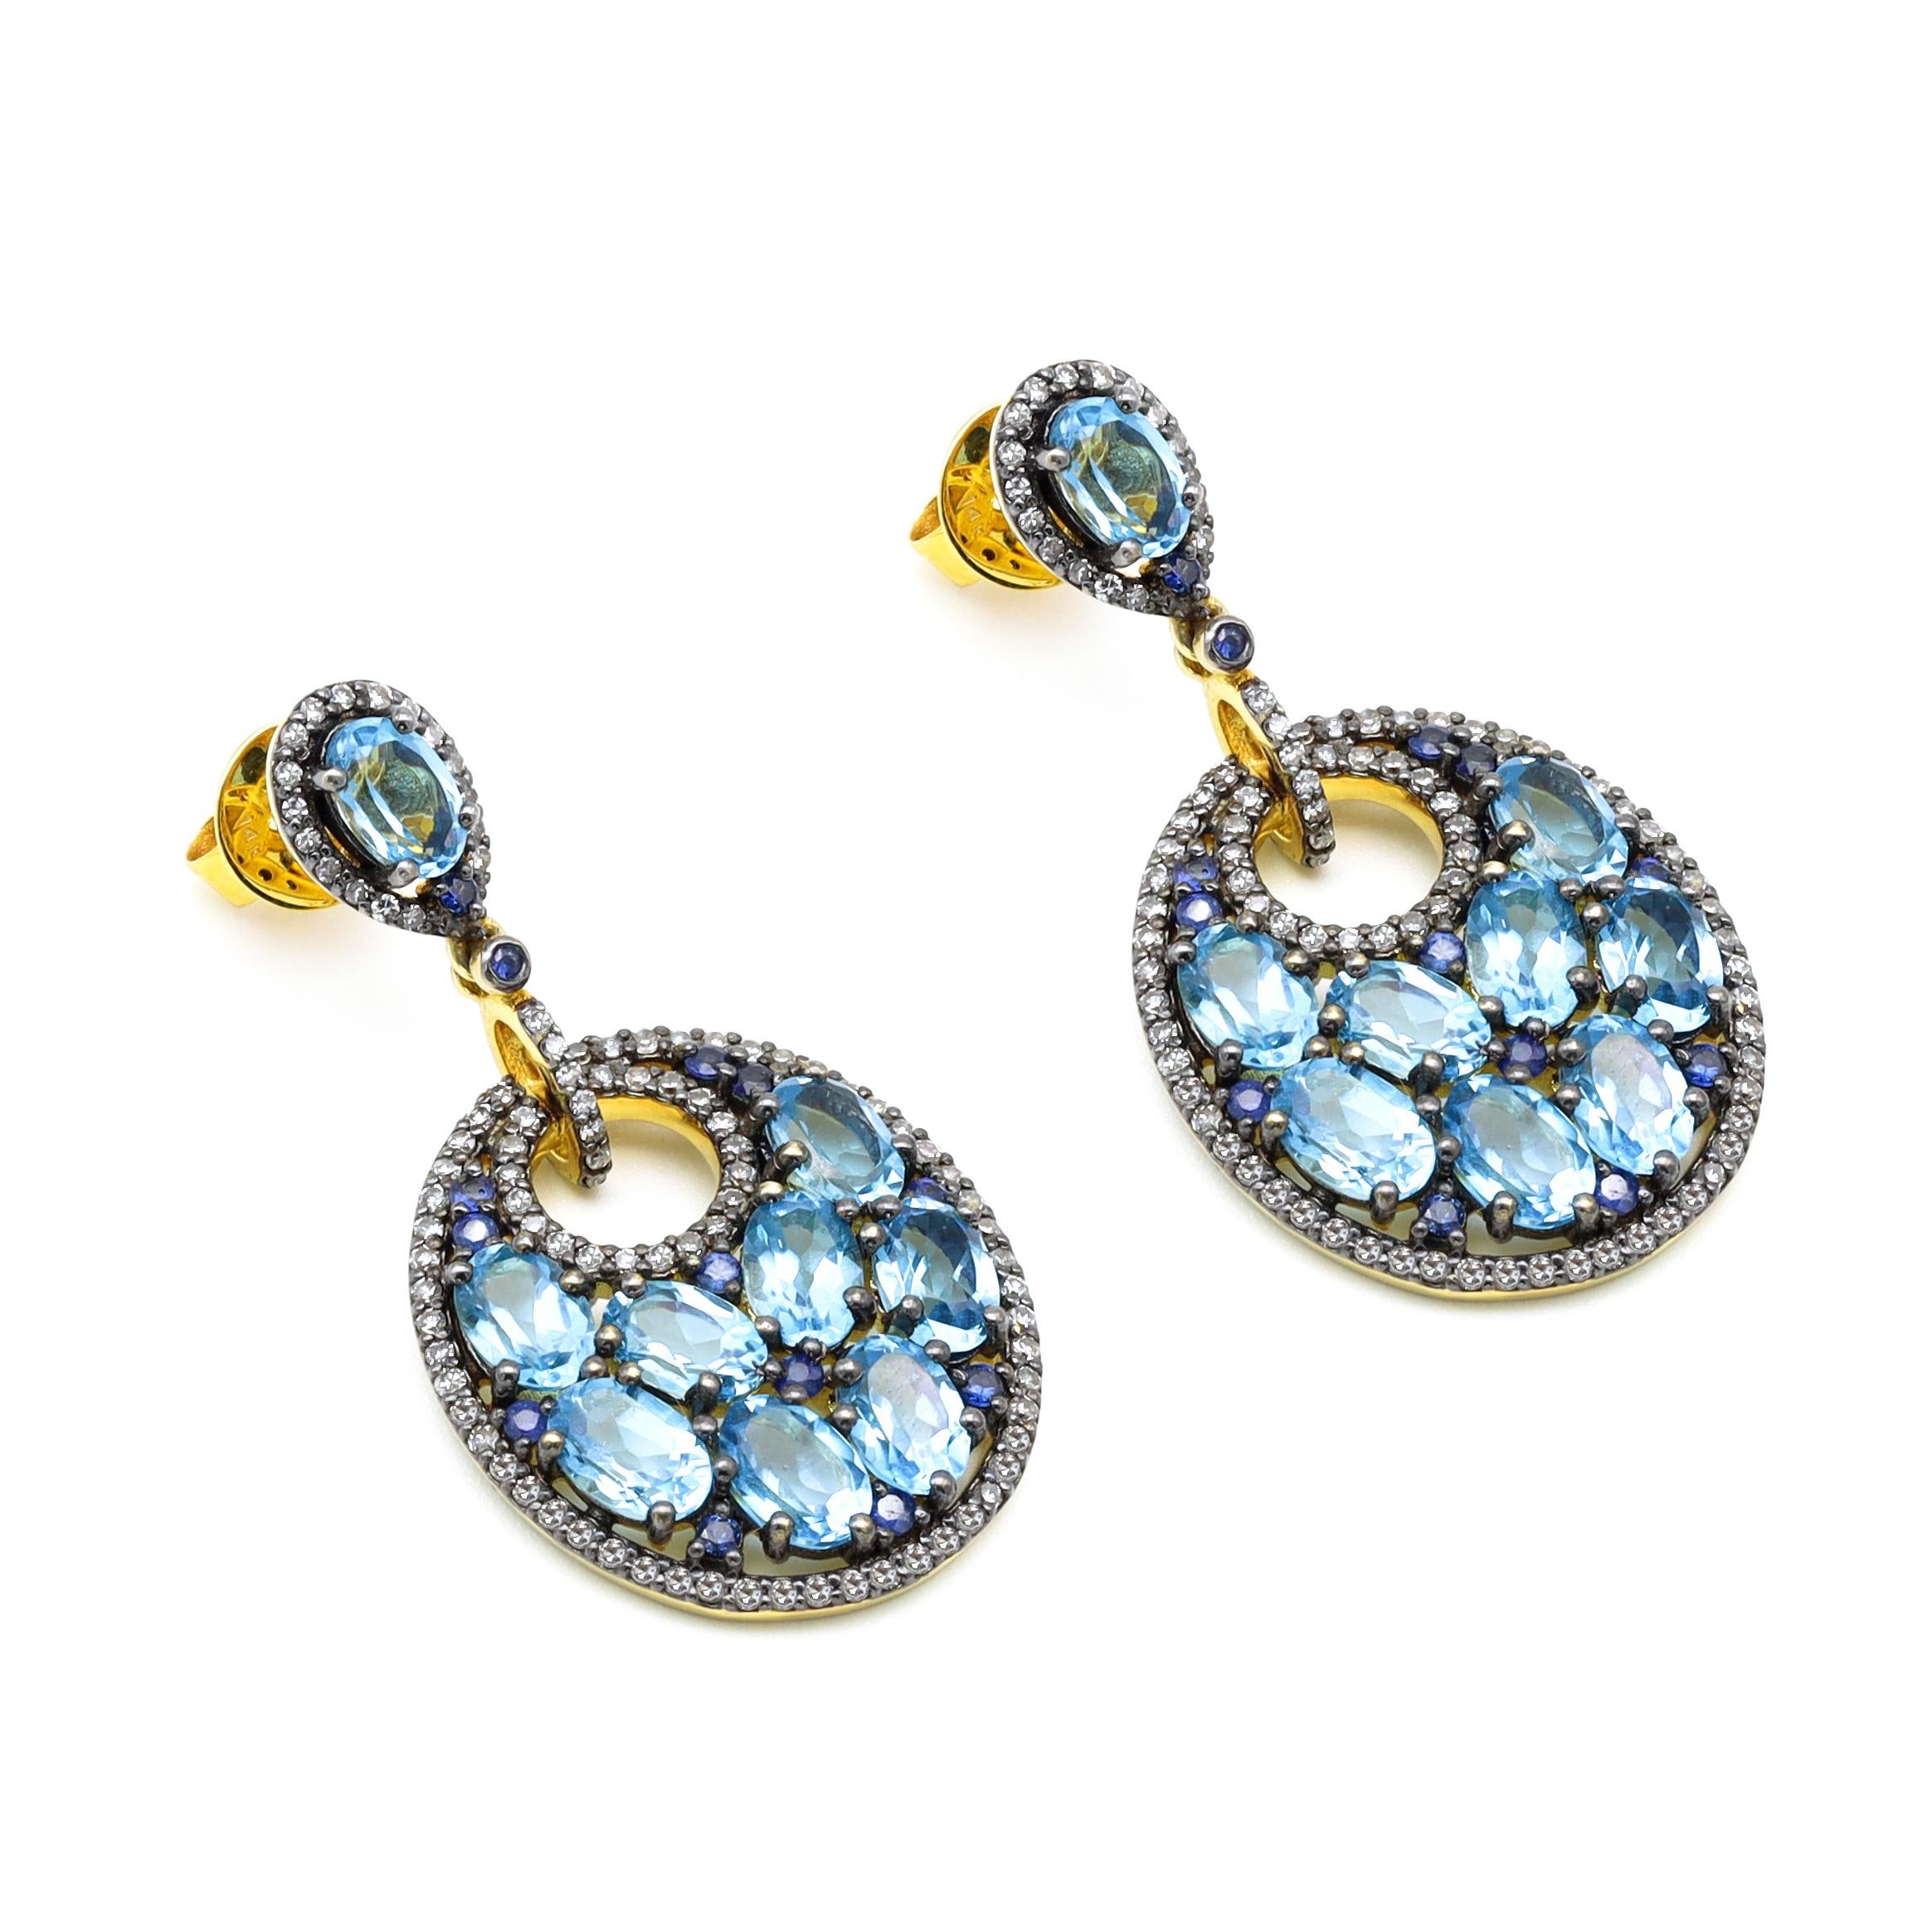 Diamond, Sapphire, and Blue Topaz Drop Earrings in Art-Deco Style

This Victorian-era art-deco style dignified with Venice blue topaz, blue sapphire, and diamond earring is gorgeous. The earring design is inspired by our passion for astronomy with